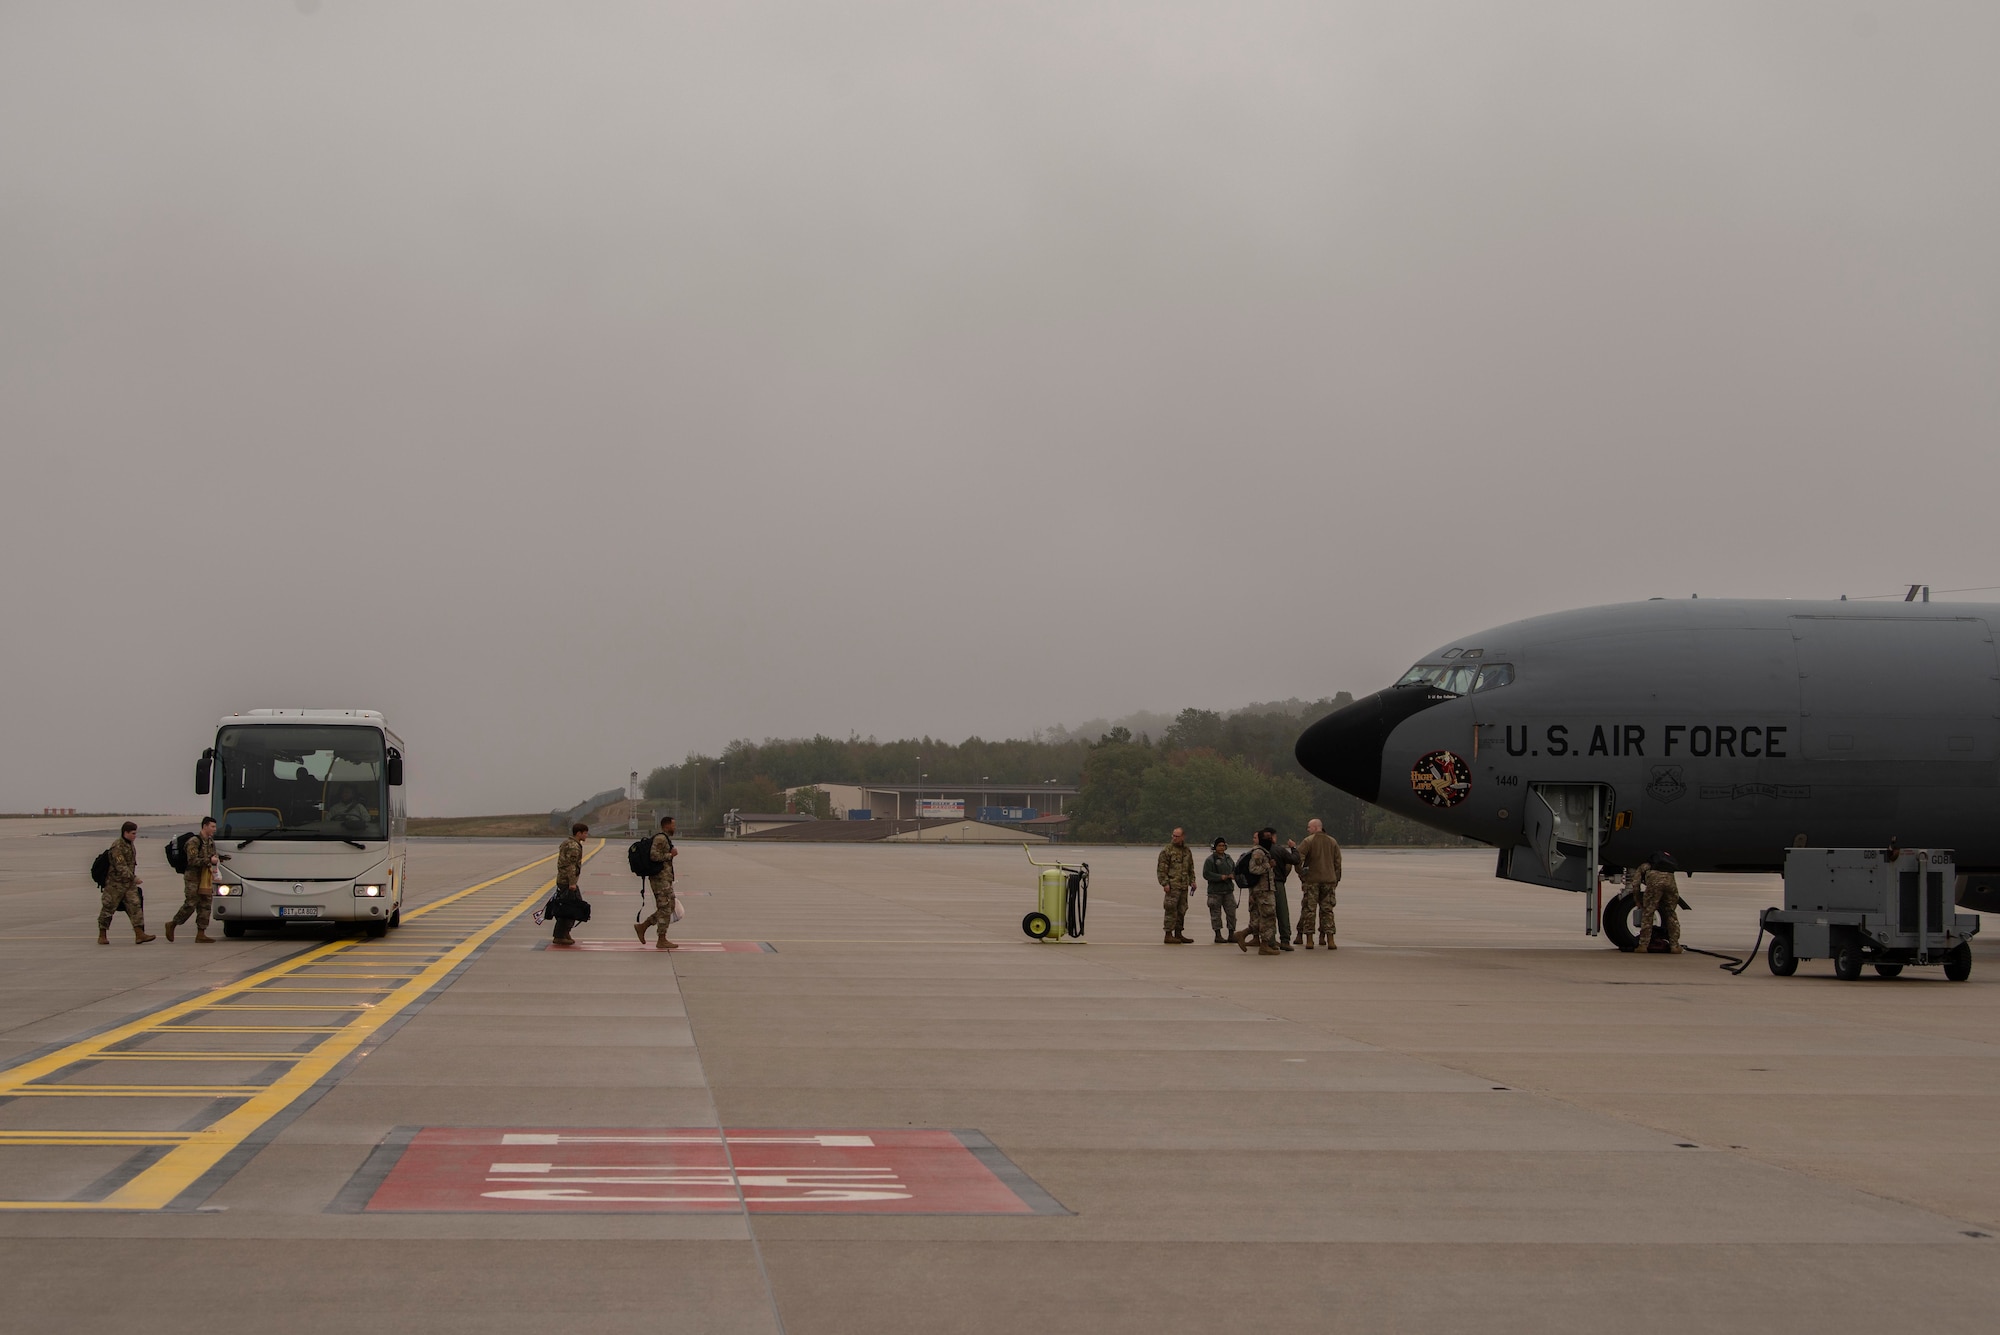 Airmen assigned to the 100th Air Refueling Wing, Royal Air Force Mildenhall, England, prepare to board a U.S. Air Force KC-135 Stratotanker aircraft during Exercise Wolff Pack at Spangdahlem Air Base, Germany, Sept. 30, 2020. The 100th ARW provided air refueling capability from diverse operating locations in Europe with varying levels of support to enable lethal combat airpower with-in the U.S. Air Forces in Europe-Air Forces Africa area of responsibility. (U.S. Air Force photo by Airman 1st Class Joseph Barron)